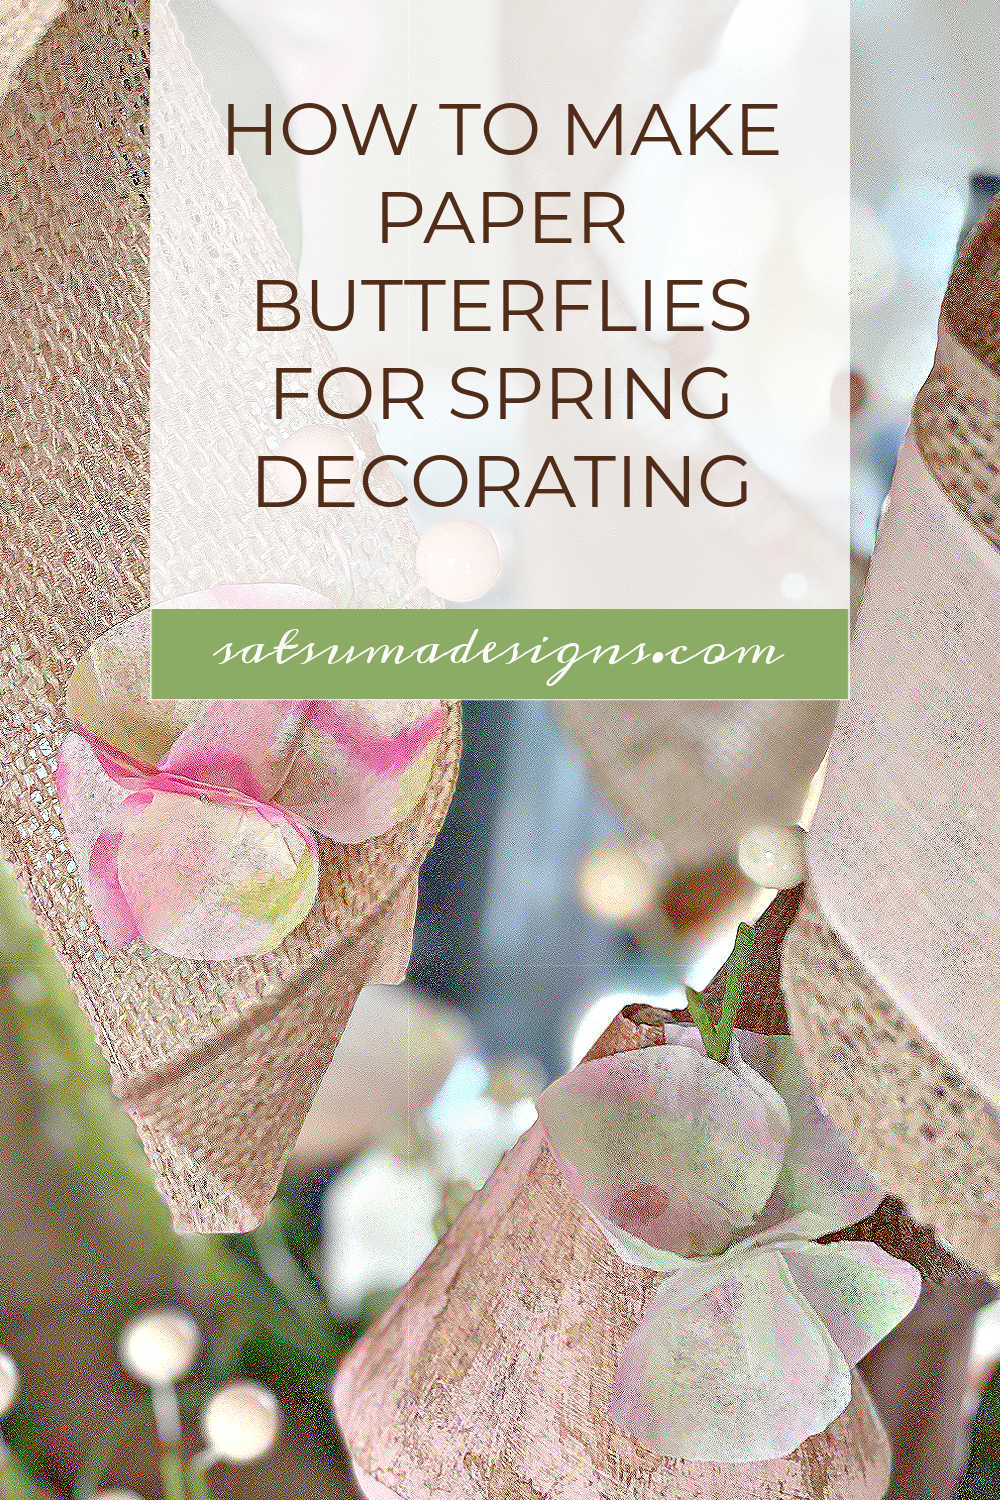 How To Make Paper Butterflies for Spring Decorating